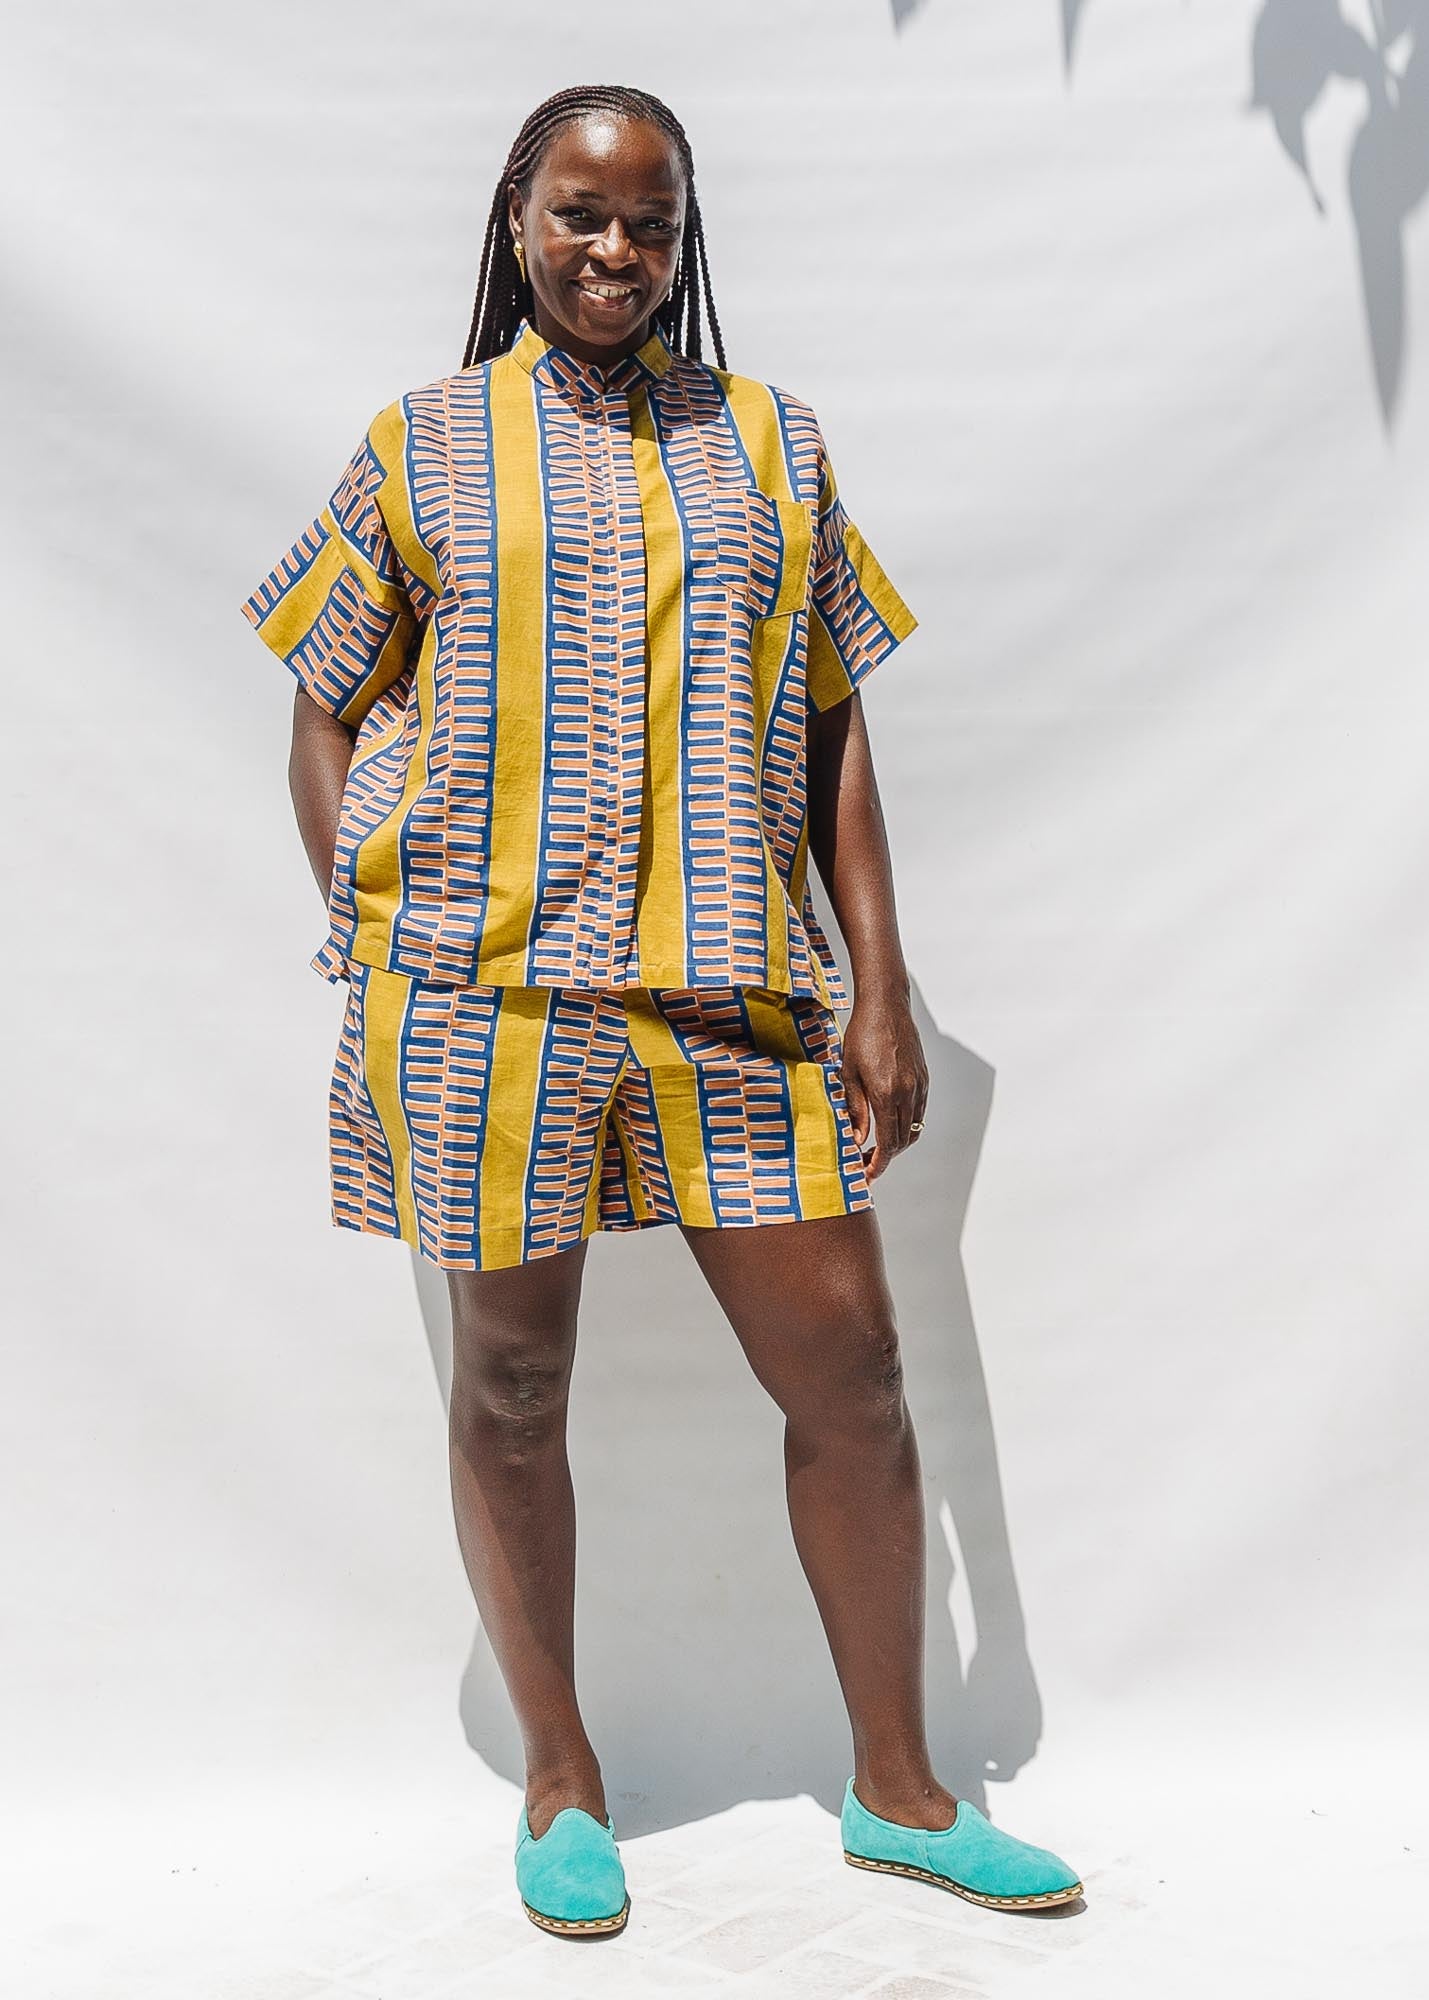 The model is wearing olive-yellow, blue, orange and white geometric printed shirt